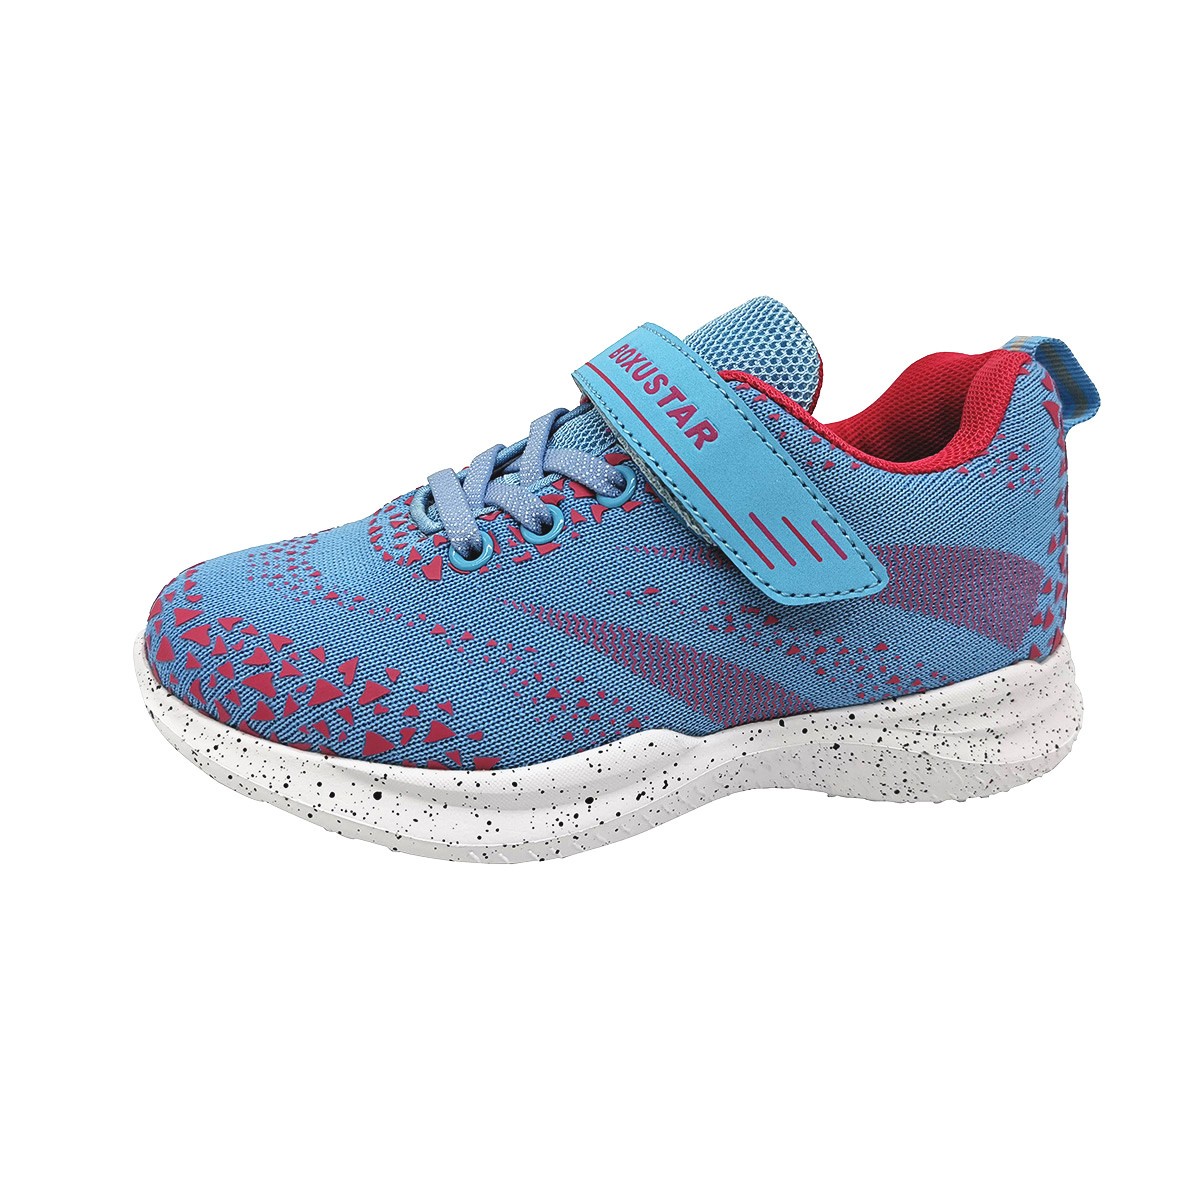 Children's fly knit light and soft sports shoes Manufacturers, Children's fly knit light and soft sports shoes Factory, Supply Children's fly knit light and soft sports shoes